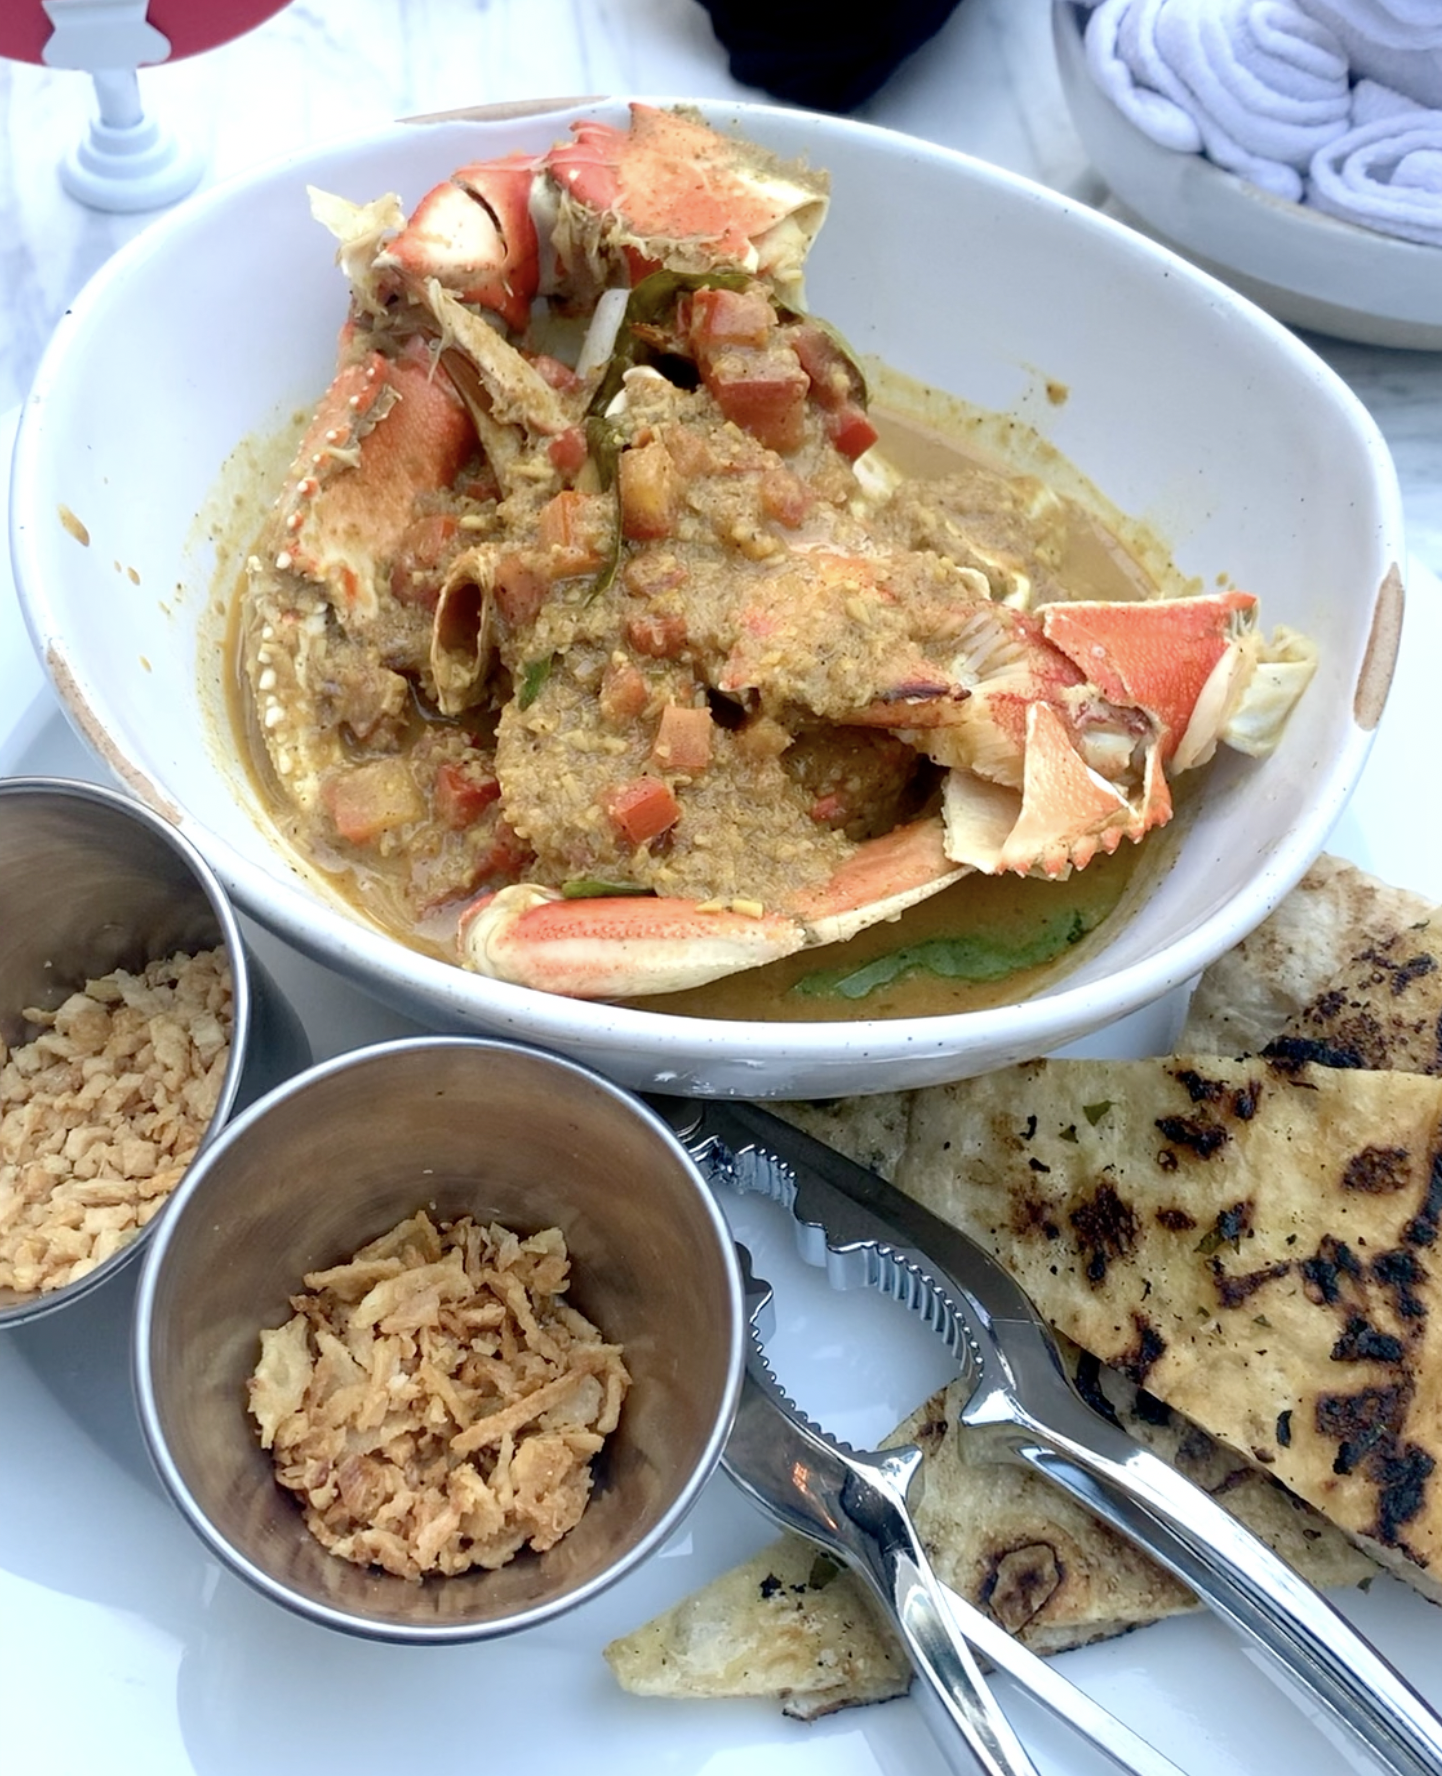 Dungeness crab in a bowl in a curry sauce with pita on the side.